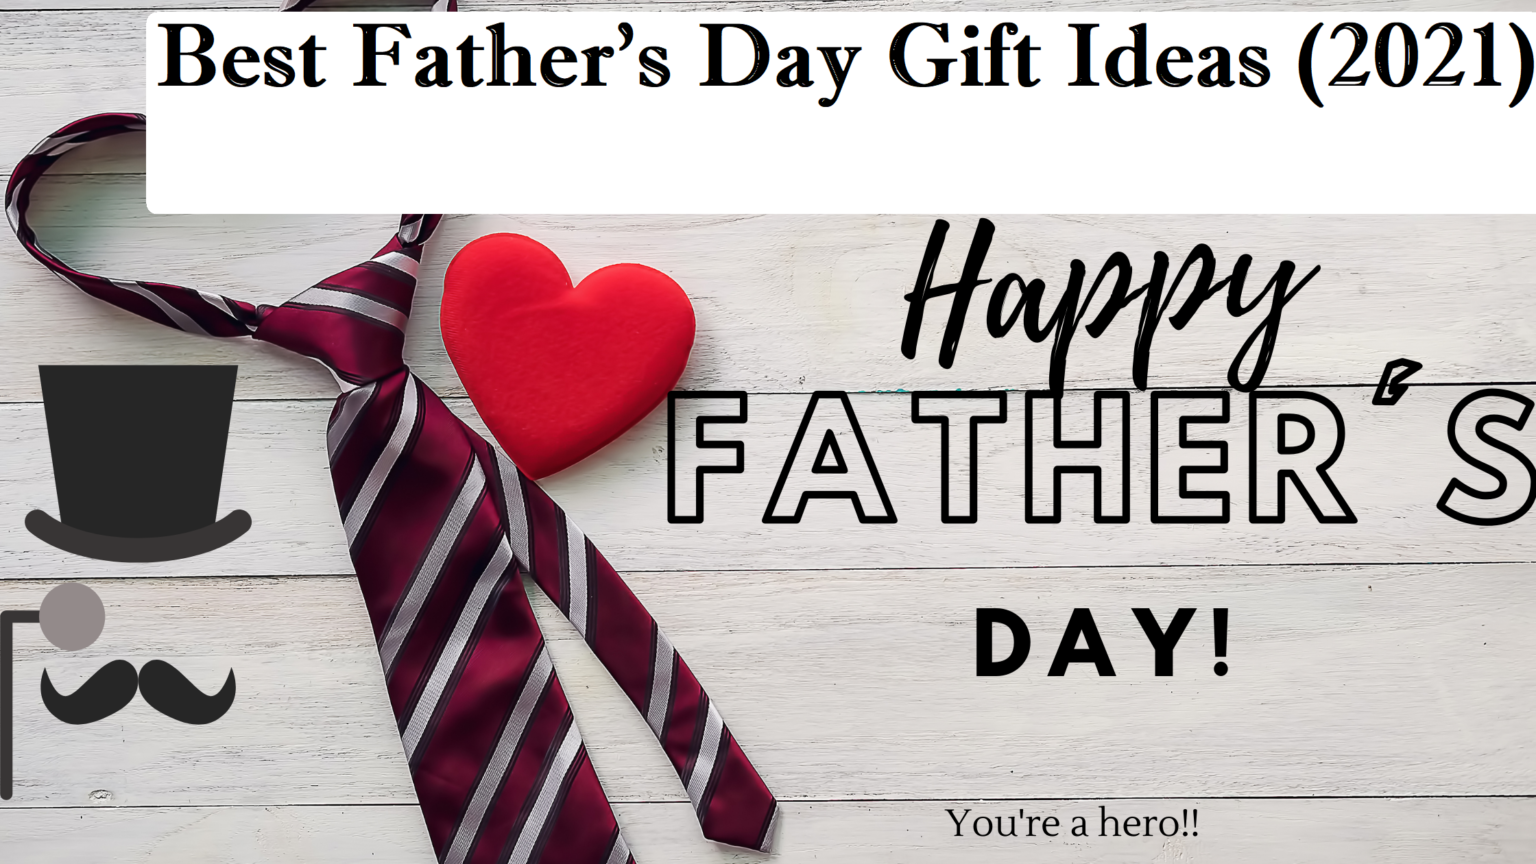 Best Father's Day Gift Ideas (2021) - Allround Achievers